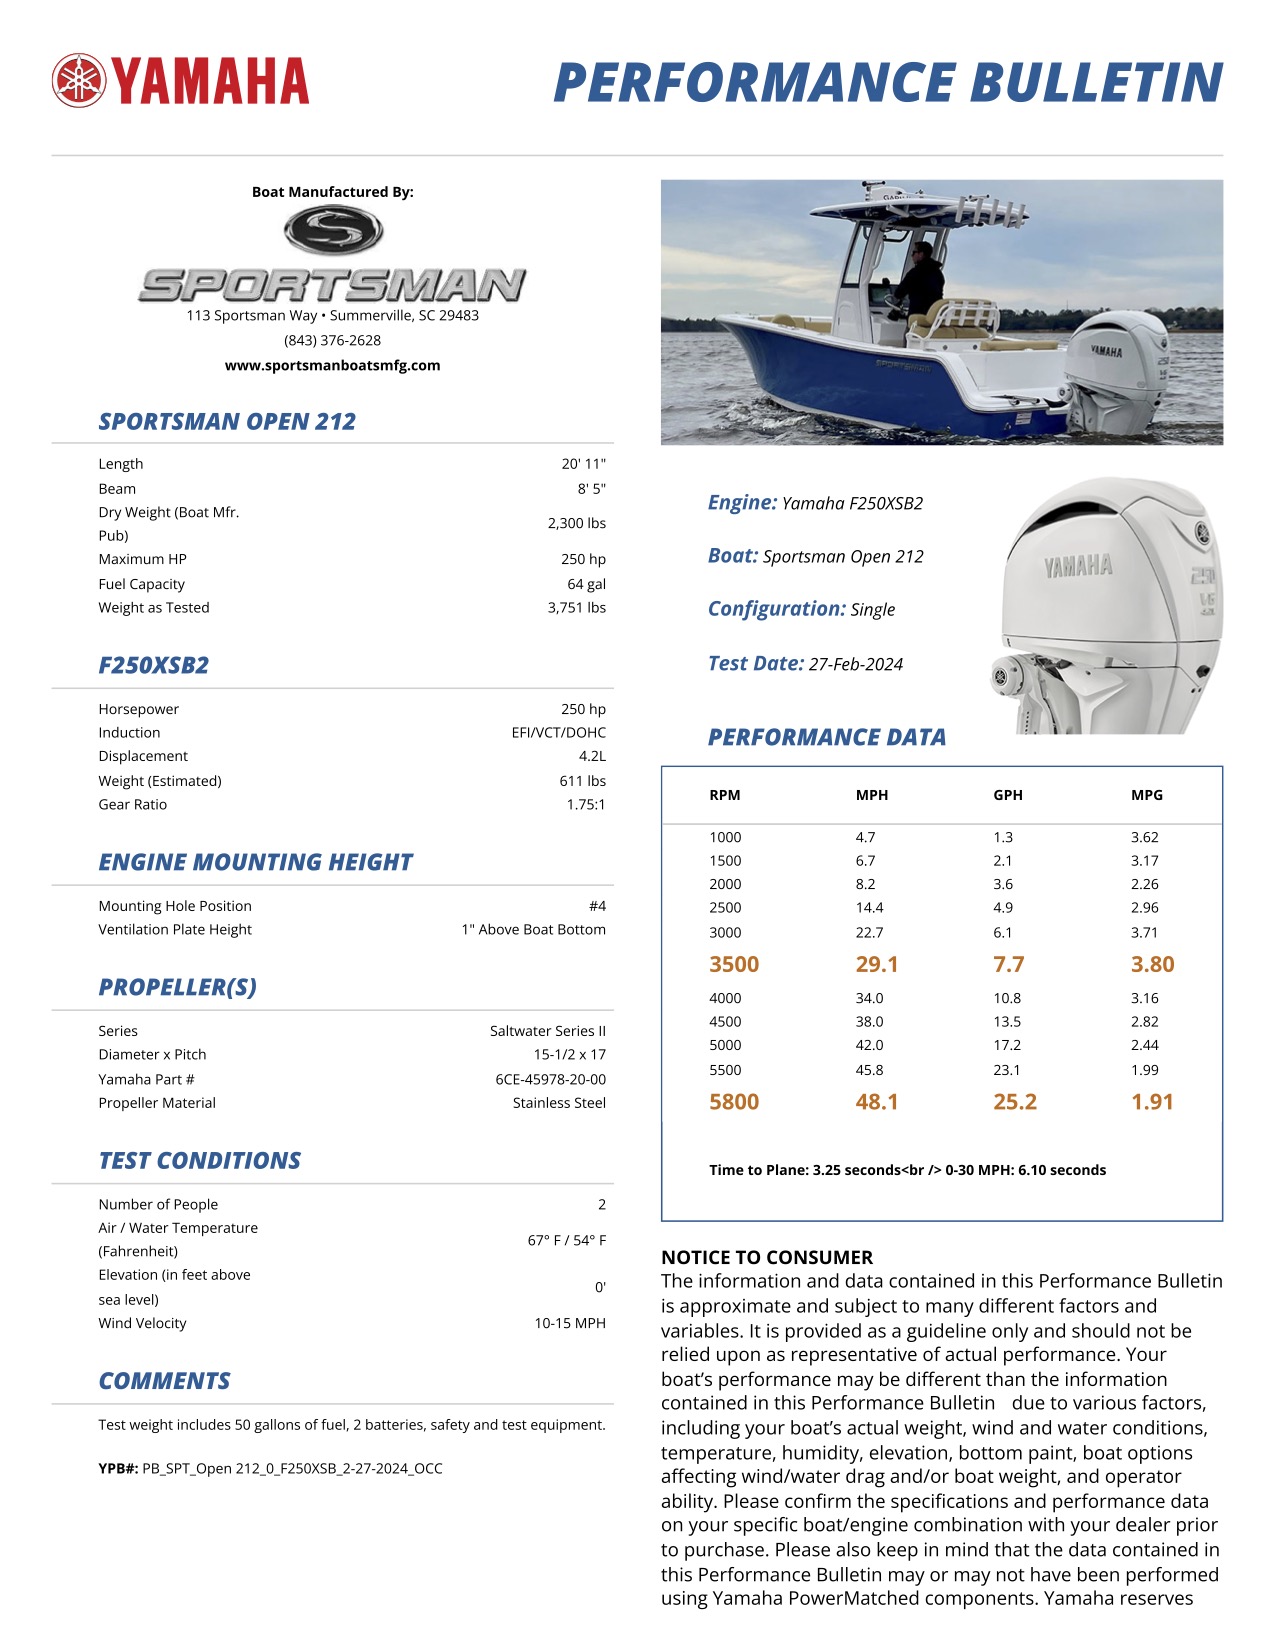 Performance bulletin for 212-center-console